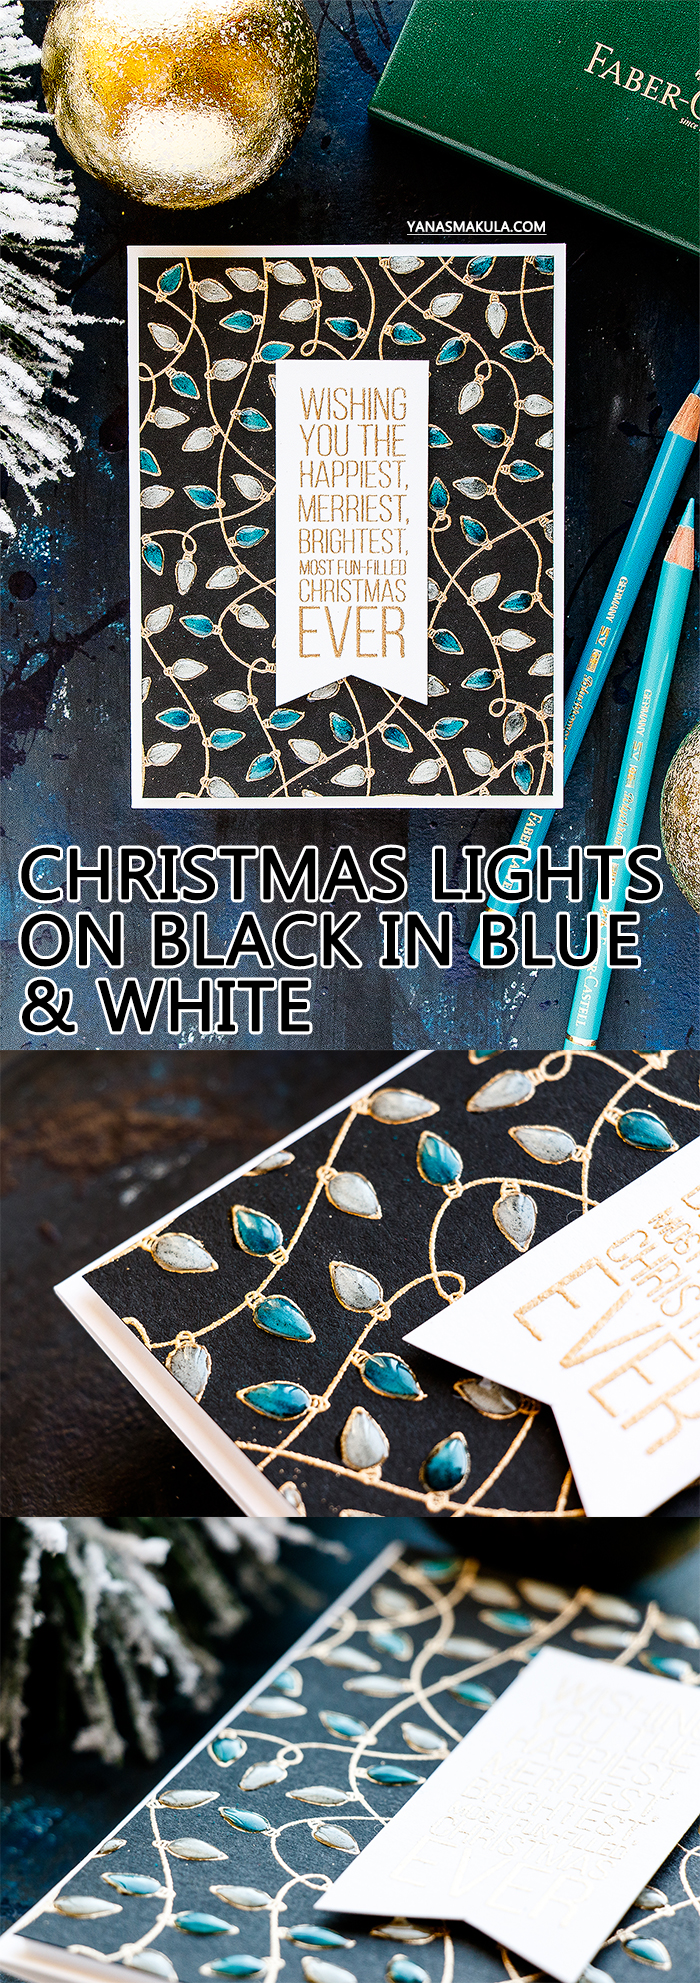 Simon Says Stamp | Christmas Lights on Black in Blue & White. Christmas Card by Yana Smakula #stamping #pencilcoloring #cardmaking